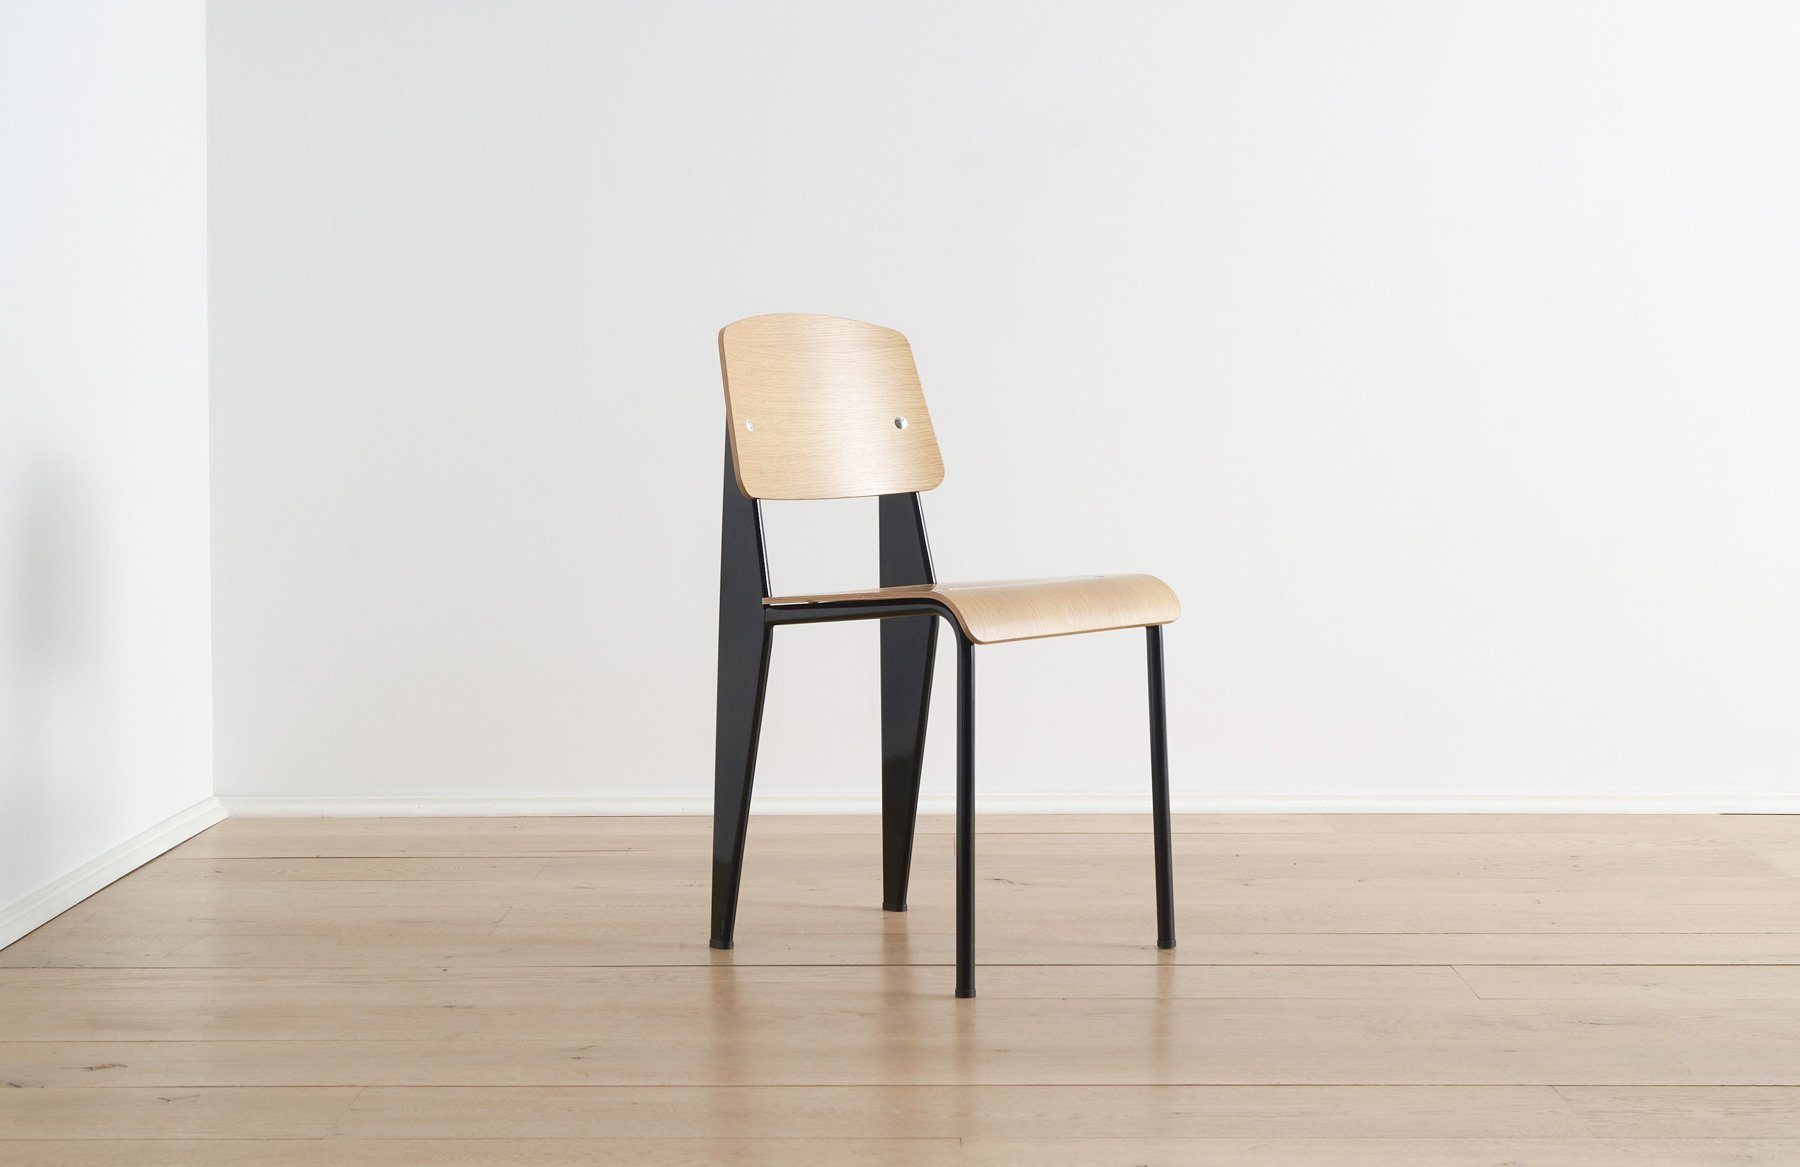 Authentic Standard Chair by Jean Prouvé for Vitra – ZZ Driggs